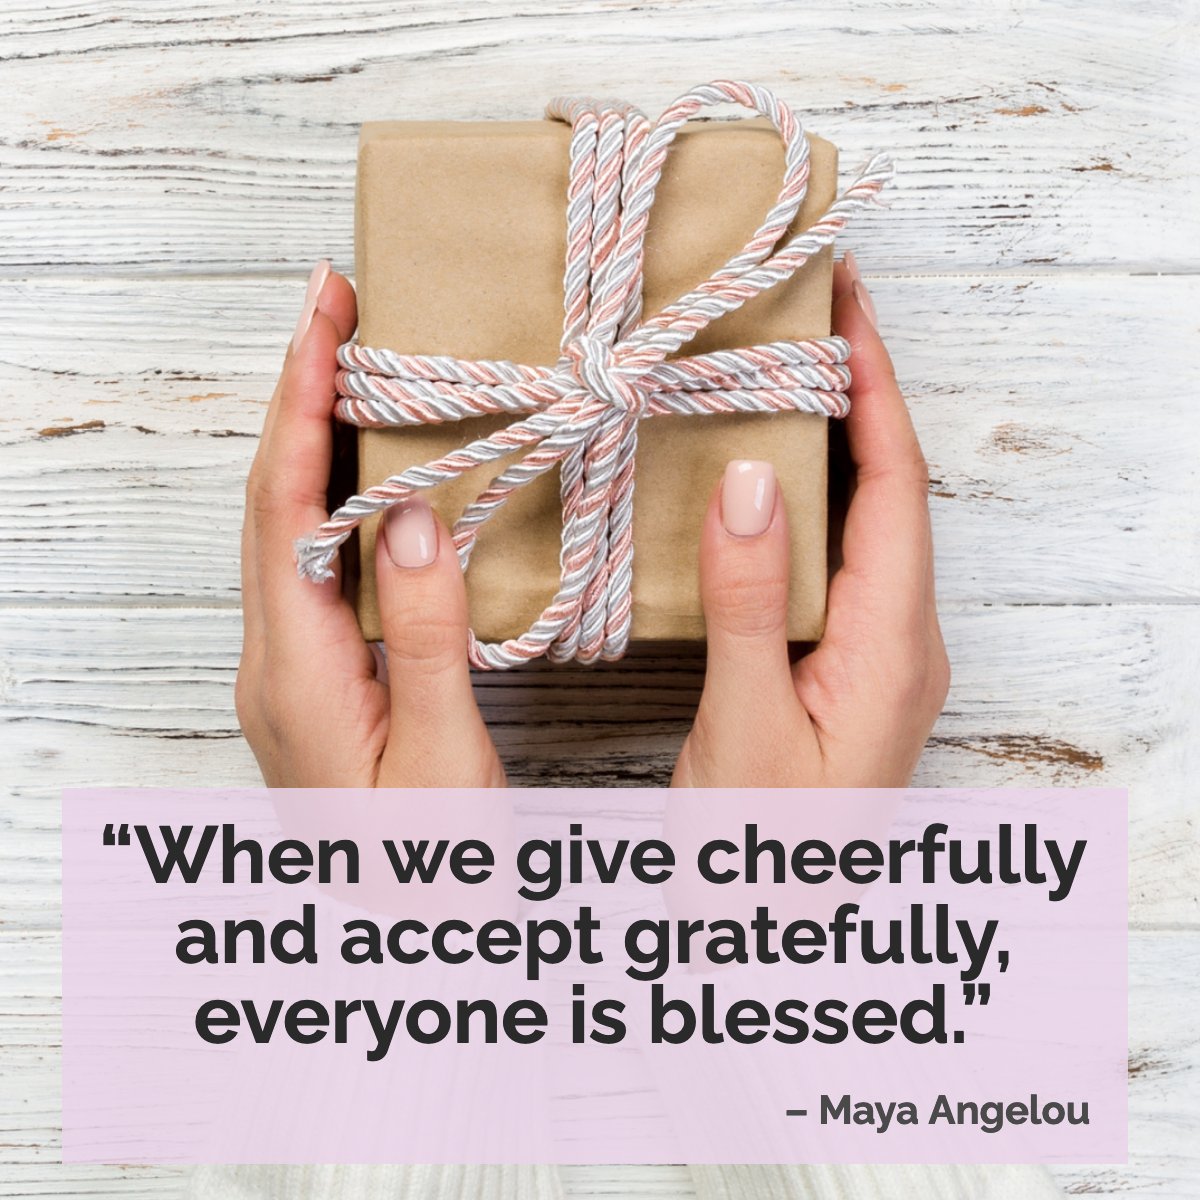 'When we give cheerfully and accept gratefully everyone is blessed' — Maya Angelou 🙏

 #wisdomquote #wisdomoftheday #quotegram #quoteoftheday✏️  #educationispower
 #chadwickknight #realtor #realestate #floridarealtor #floridarealestate #mvprealty